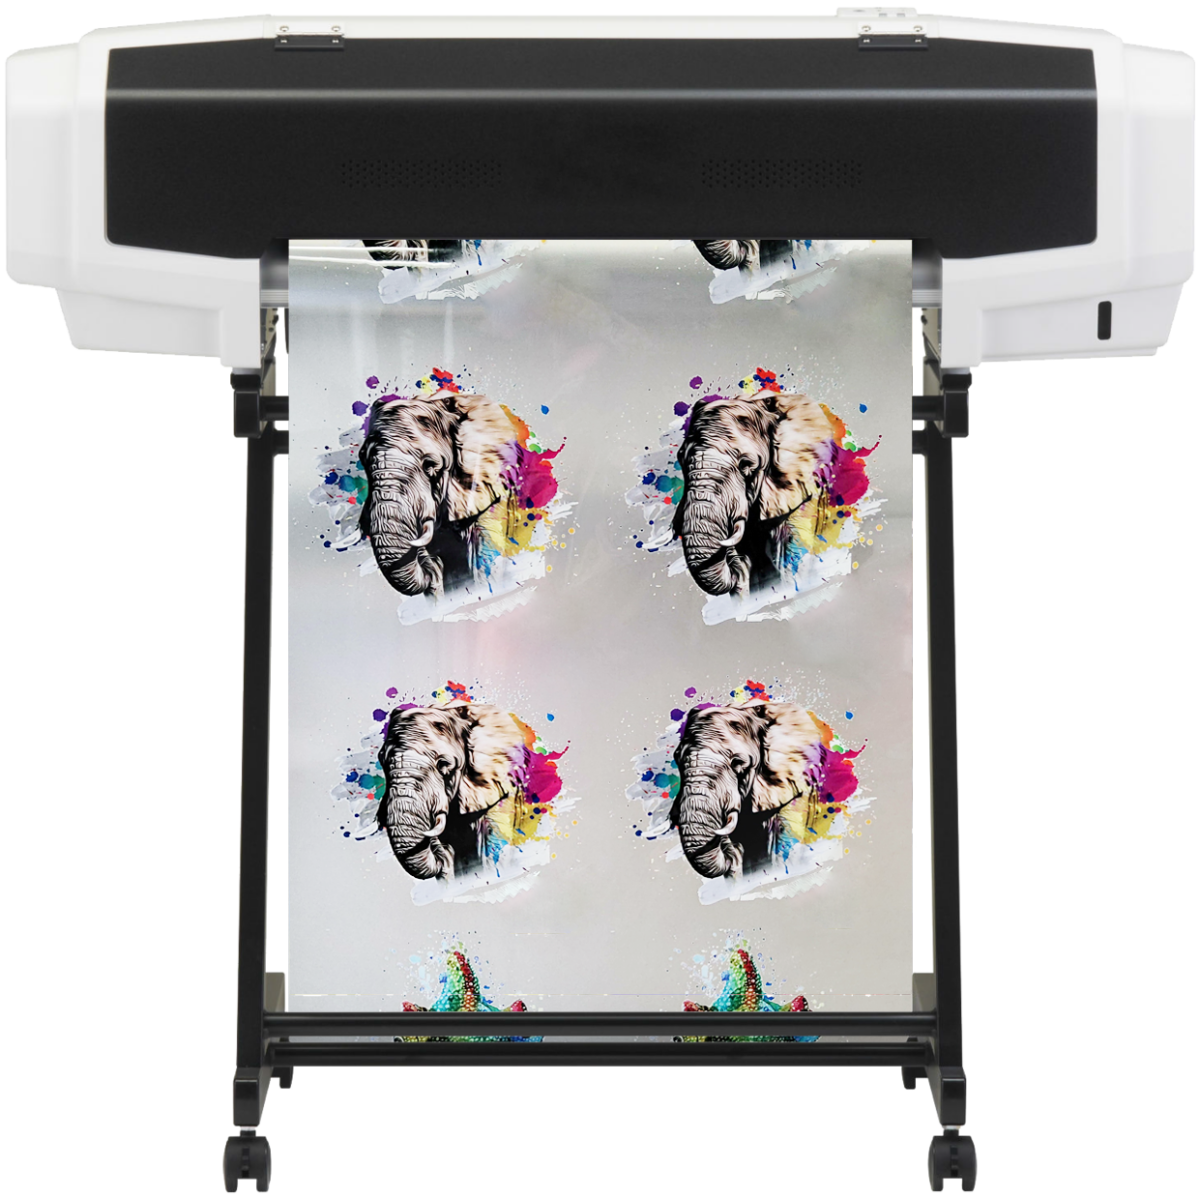 STS® Mutoh 628 STS VJ-628D-C Direct To Film Printer STS®